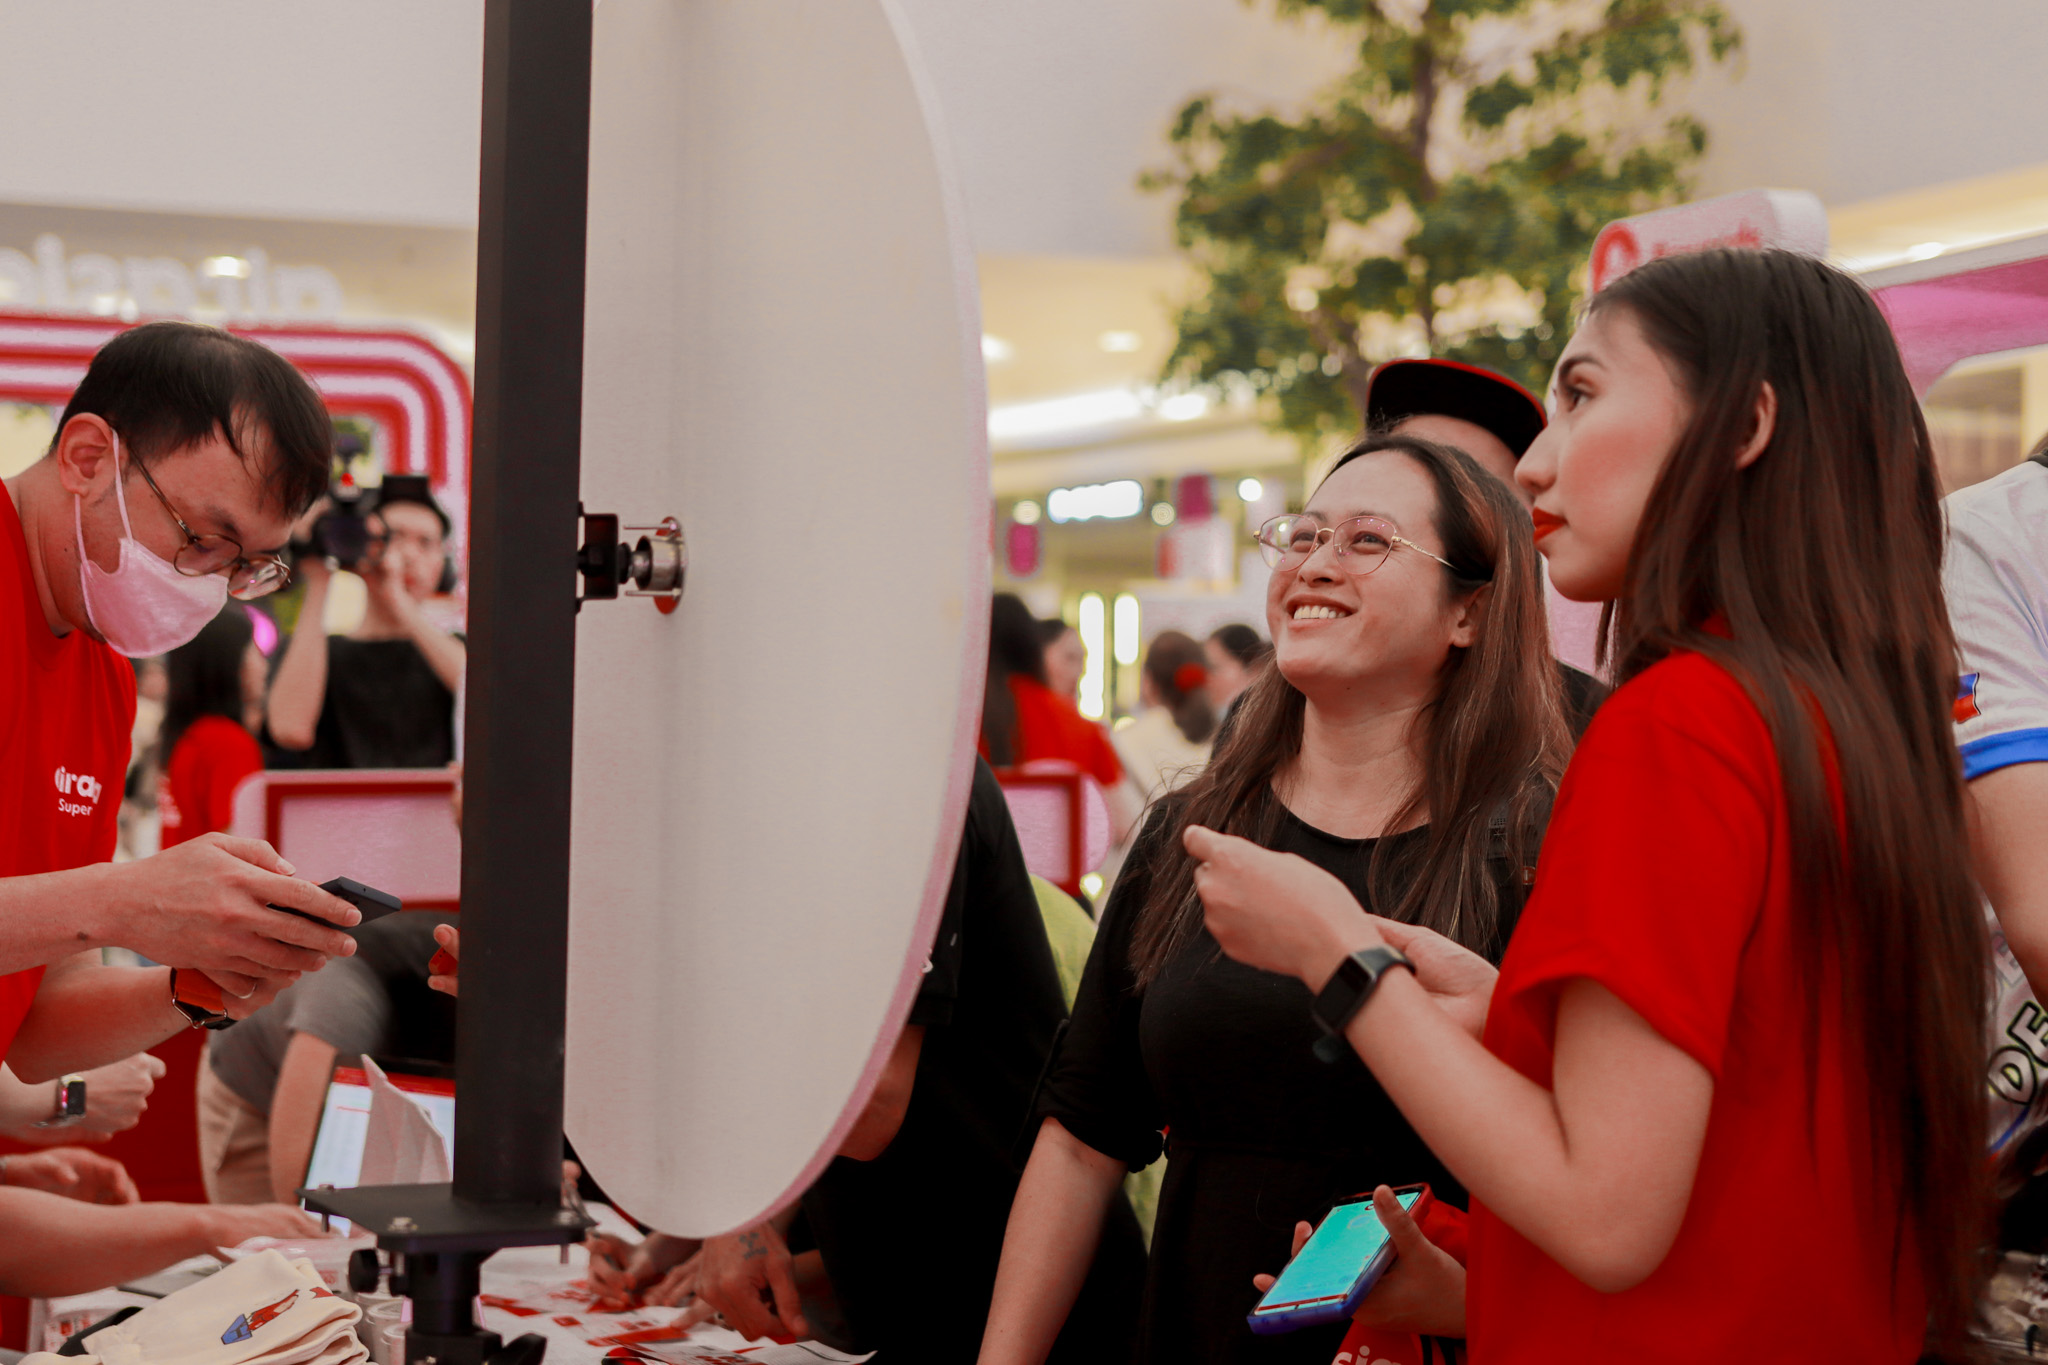 Guests_enjoy_the_booths_at_the_airasia_Superapp_#ExploreYourWay